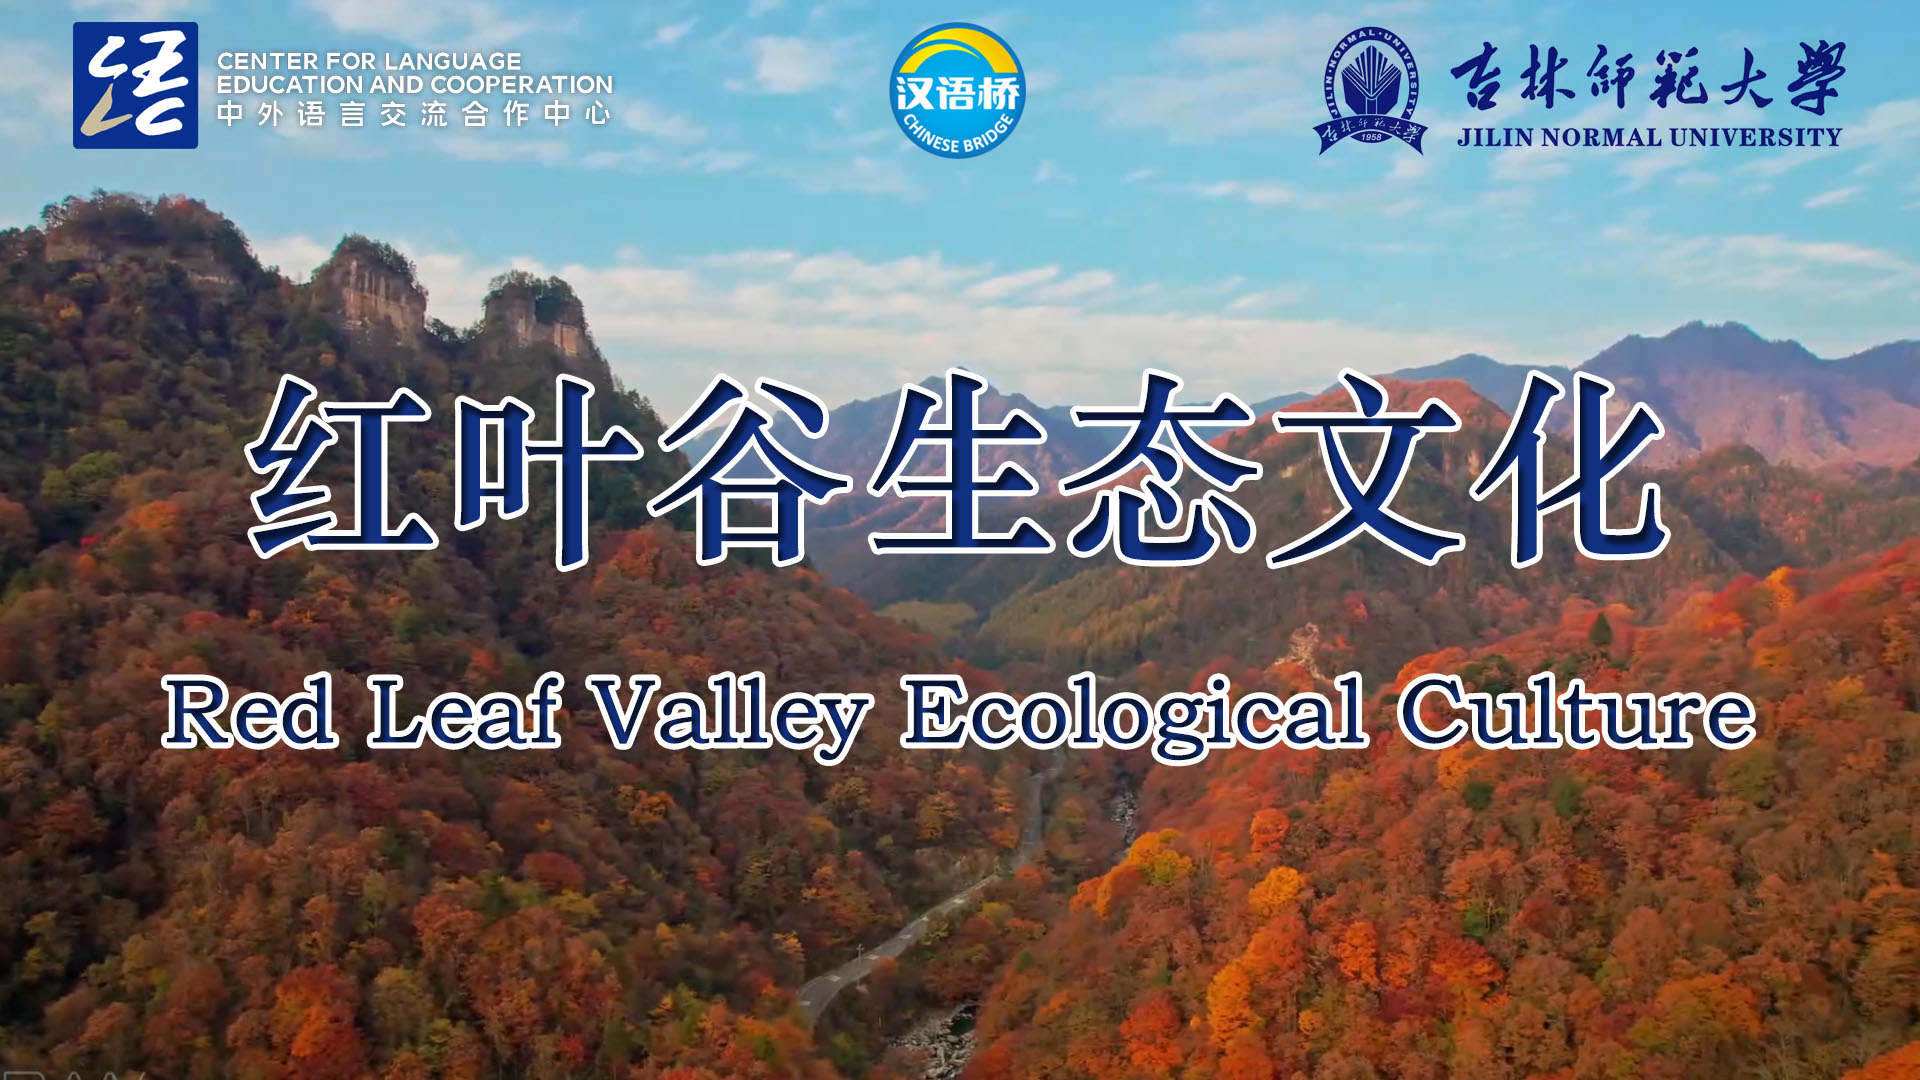 Red Leaf Valley Ecological Culture